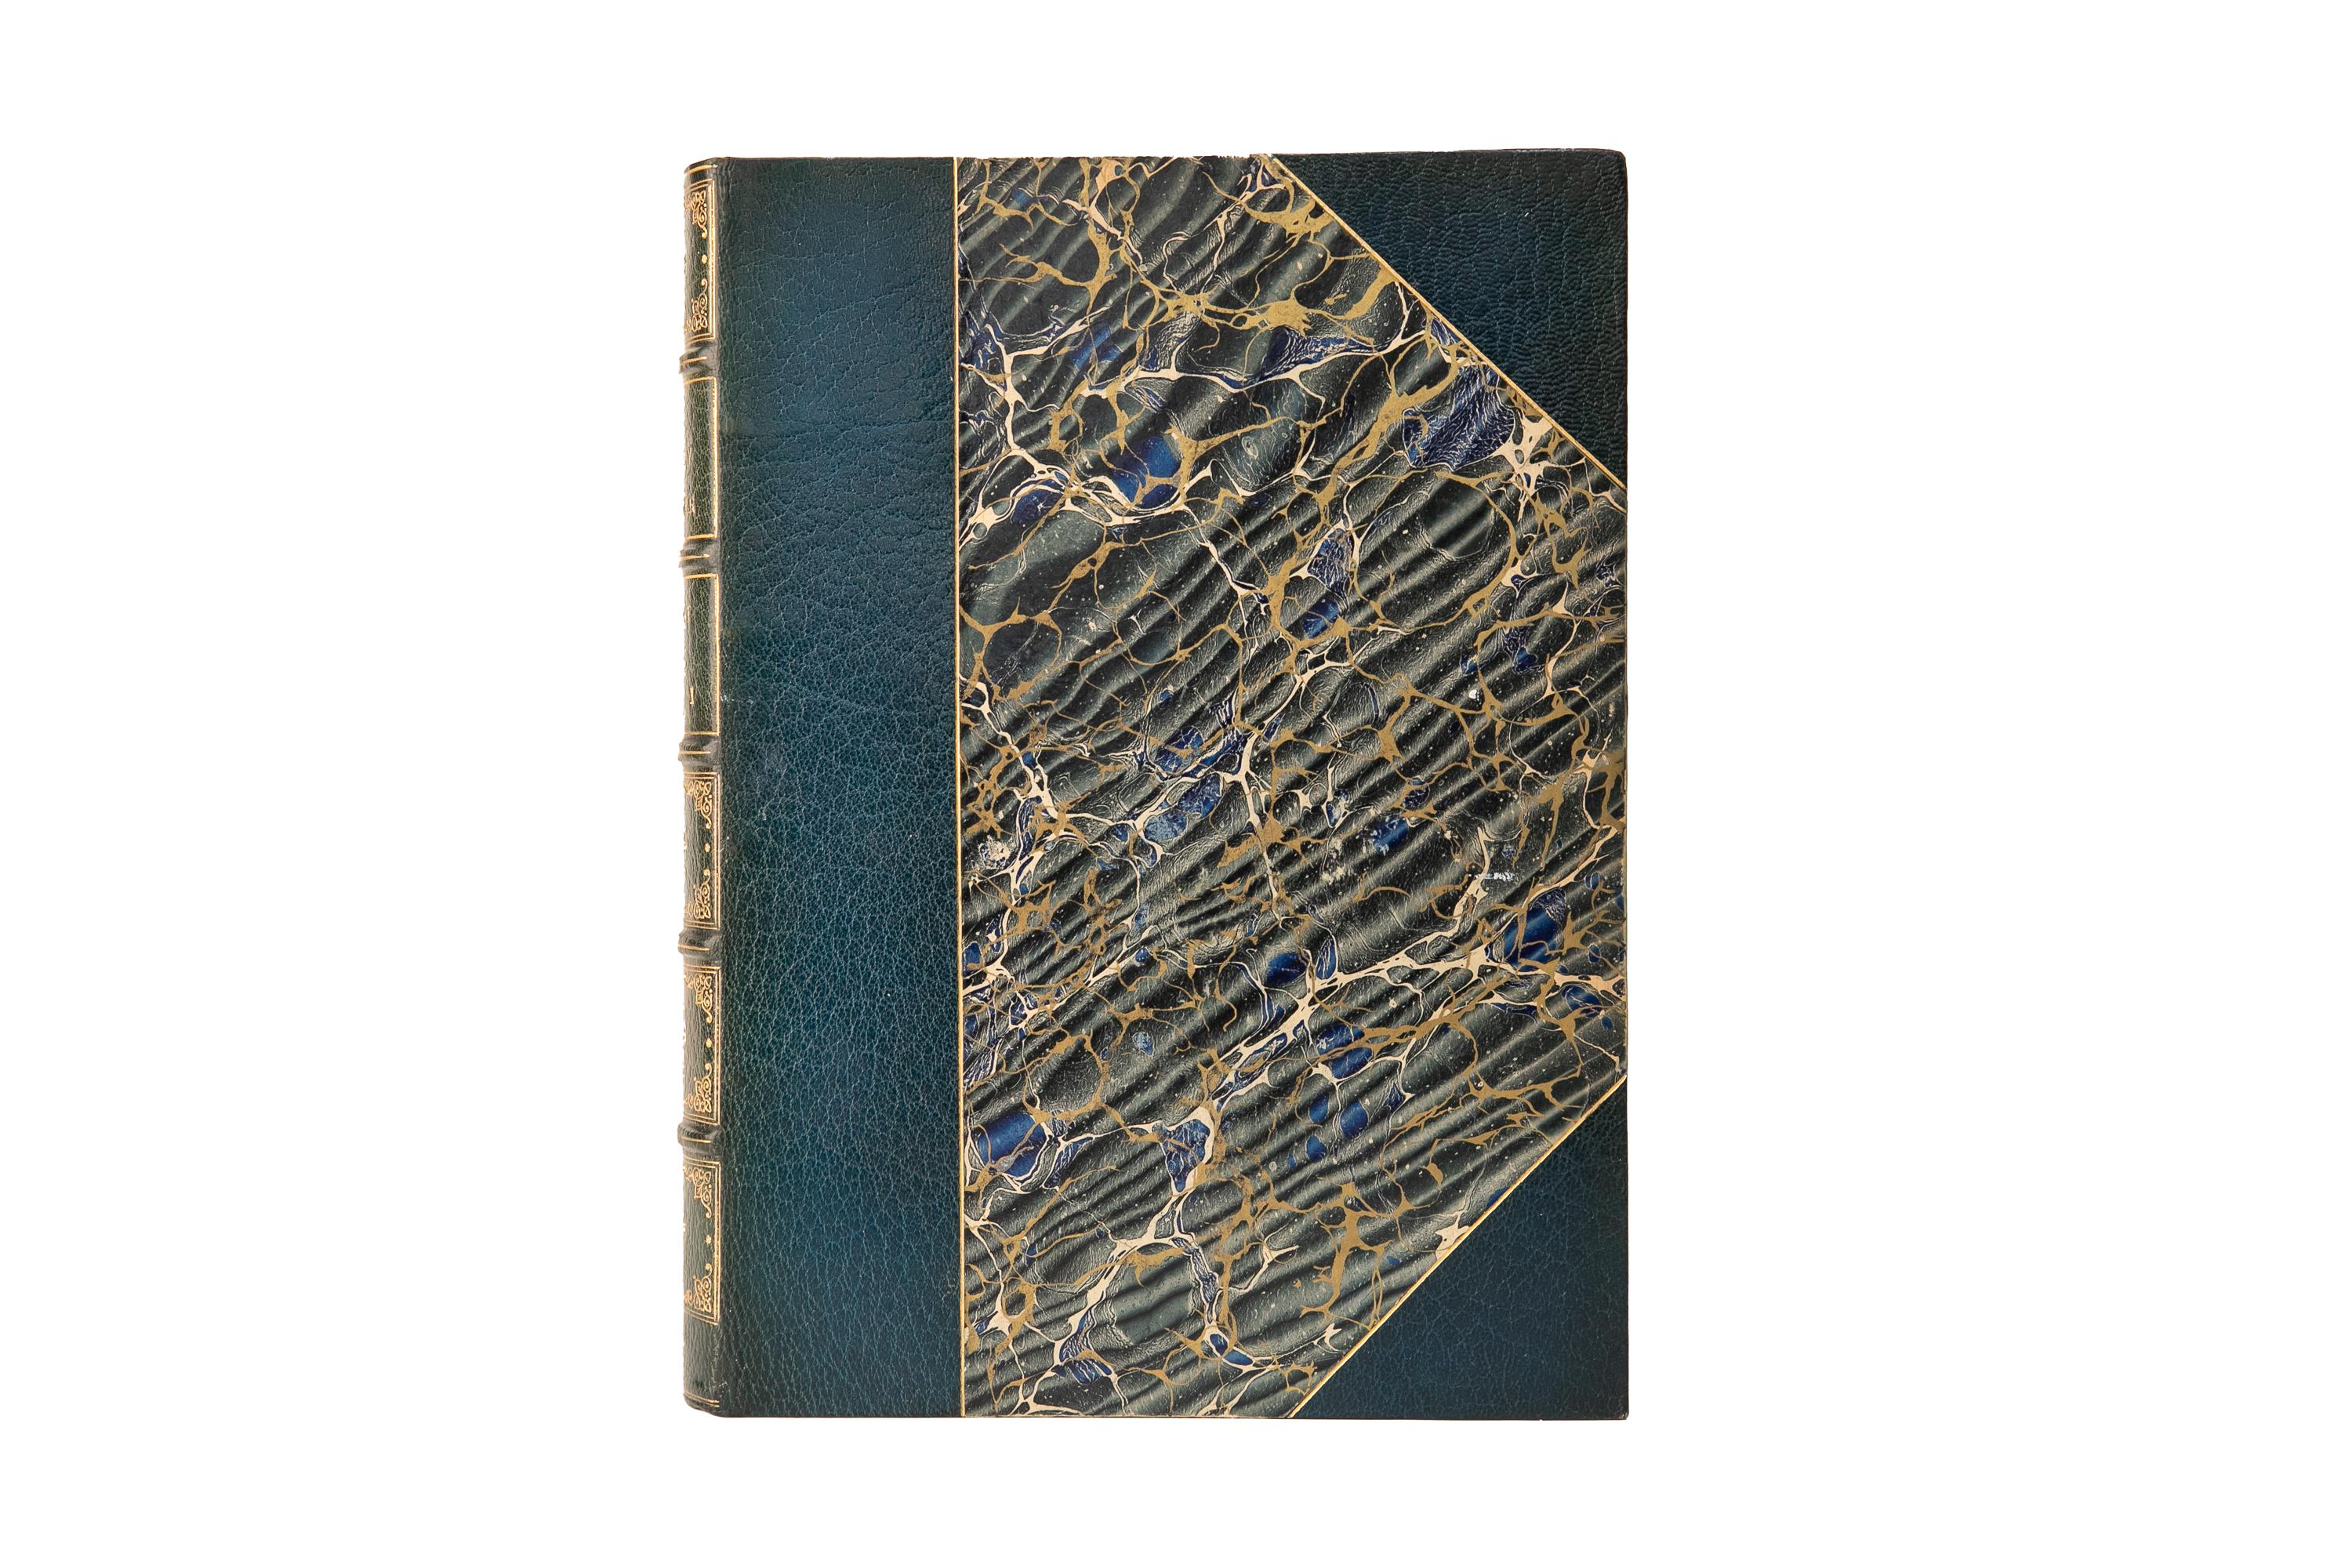 4 Volumes. Homer, The Iliad and The Odyssey. Bound in 3.4 blue morocco and marbled boards with gilt-tooling on the covers and raised band spines. The top edges are gilt with marbled endpapers. Translated by William Cullen Bryant. Published by